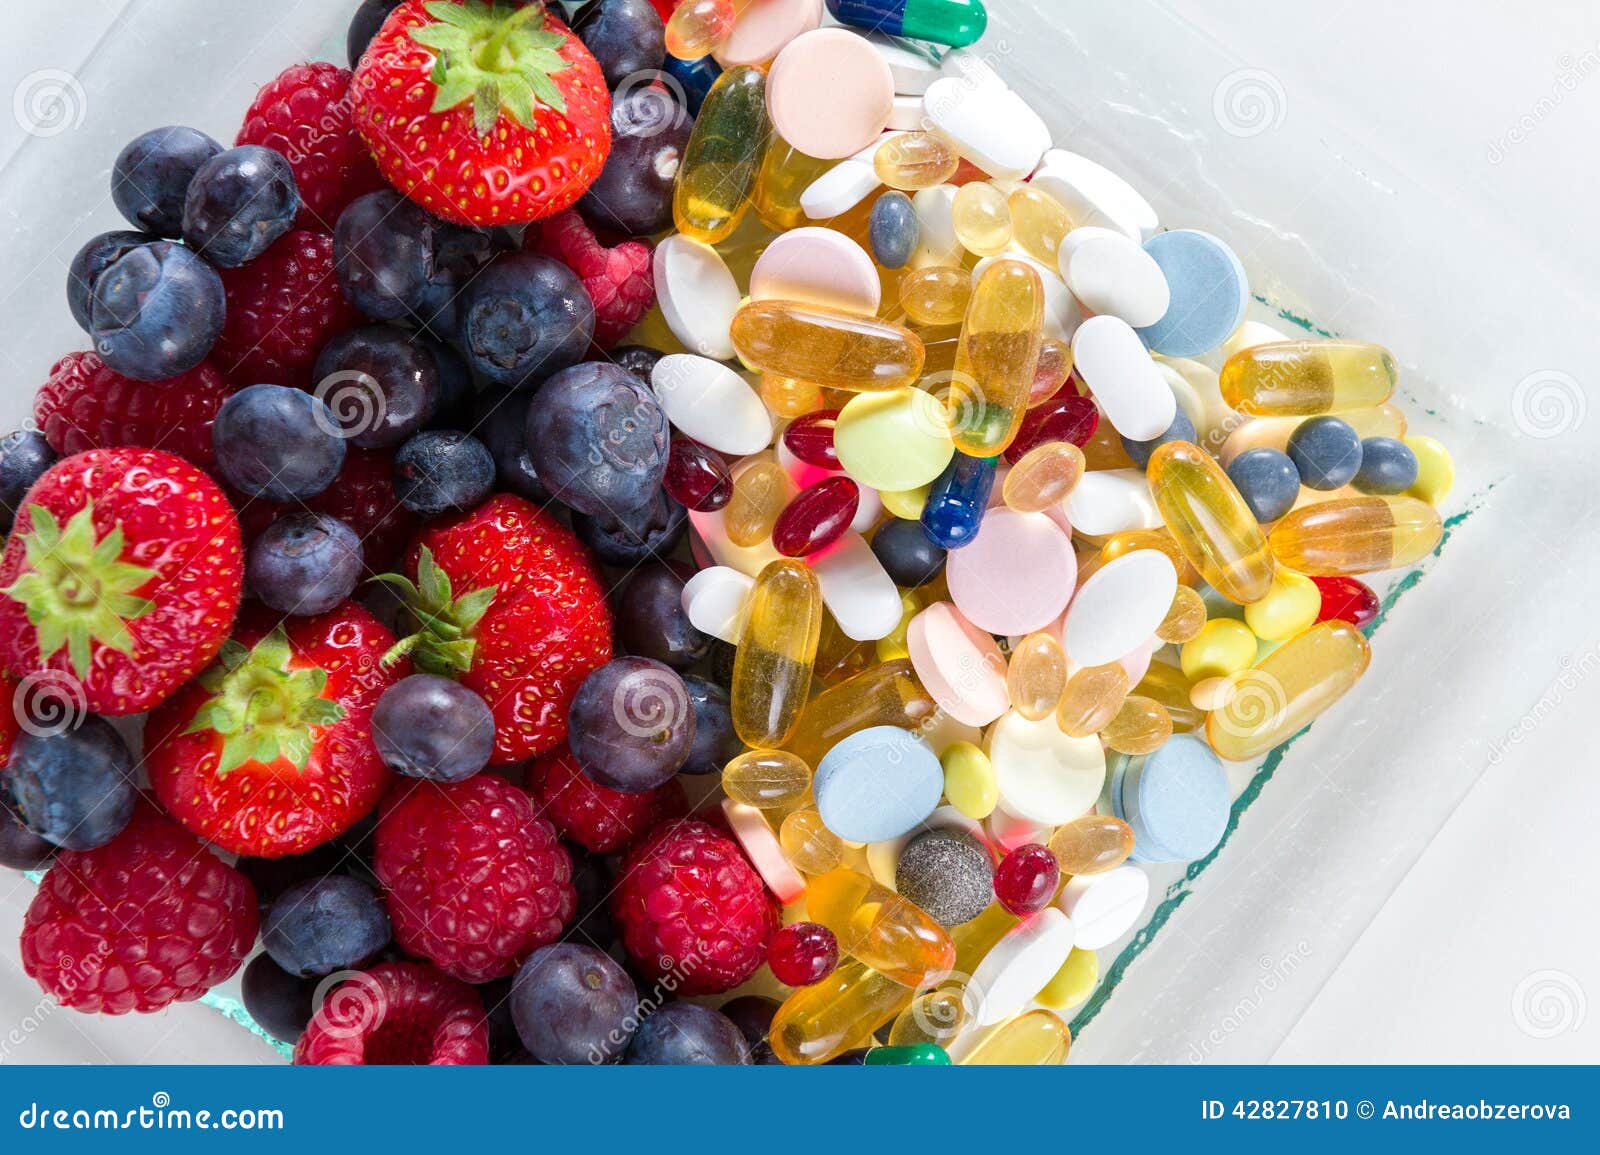 Stock Photo: Healthy lifestyle, diet concept, Fruit and pills, vitamin ...